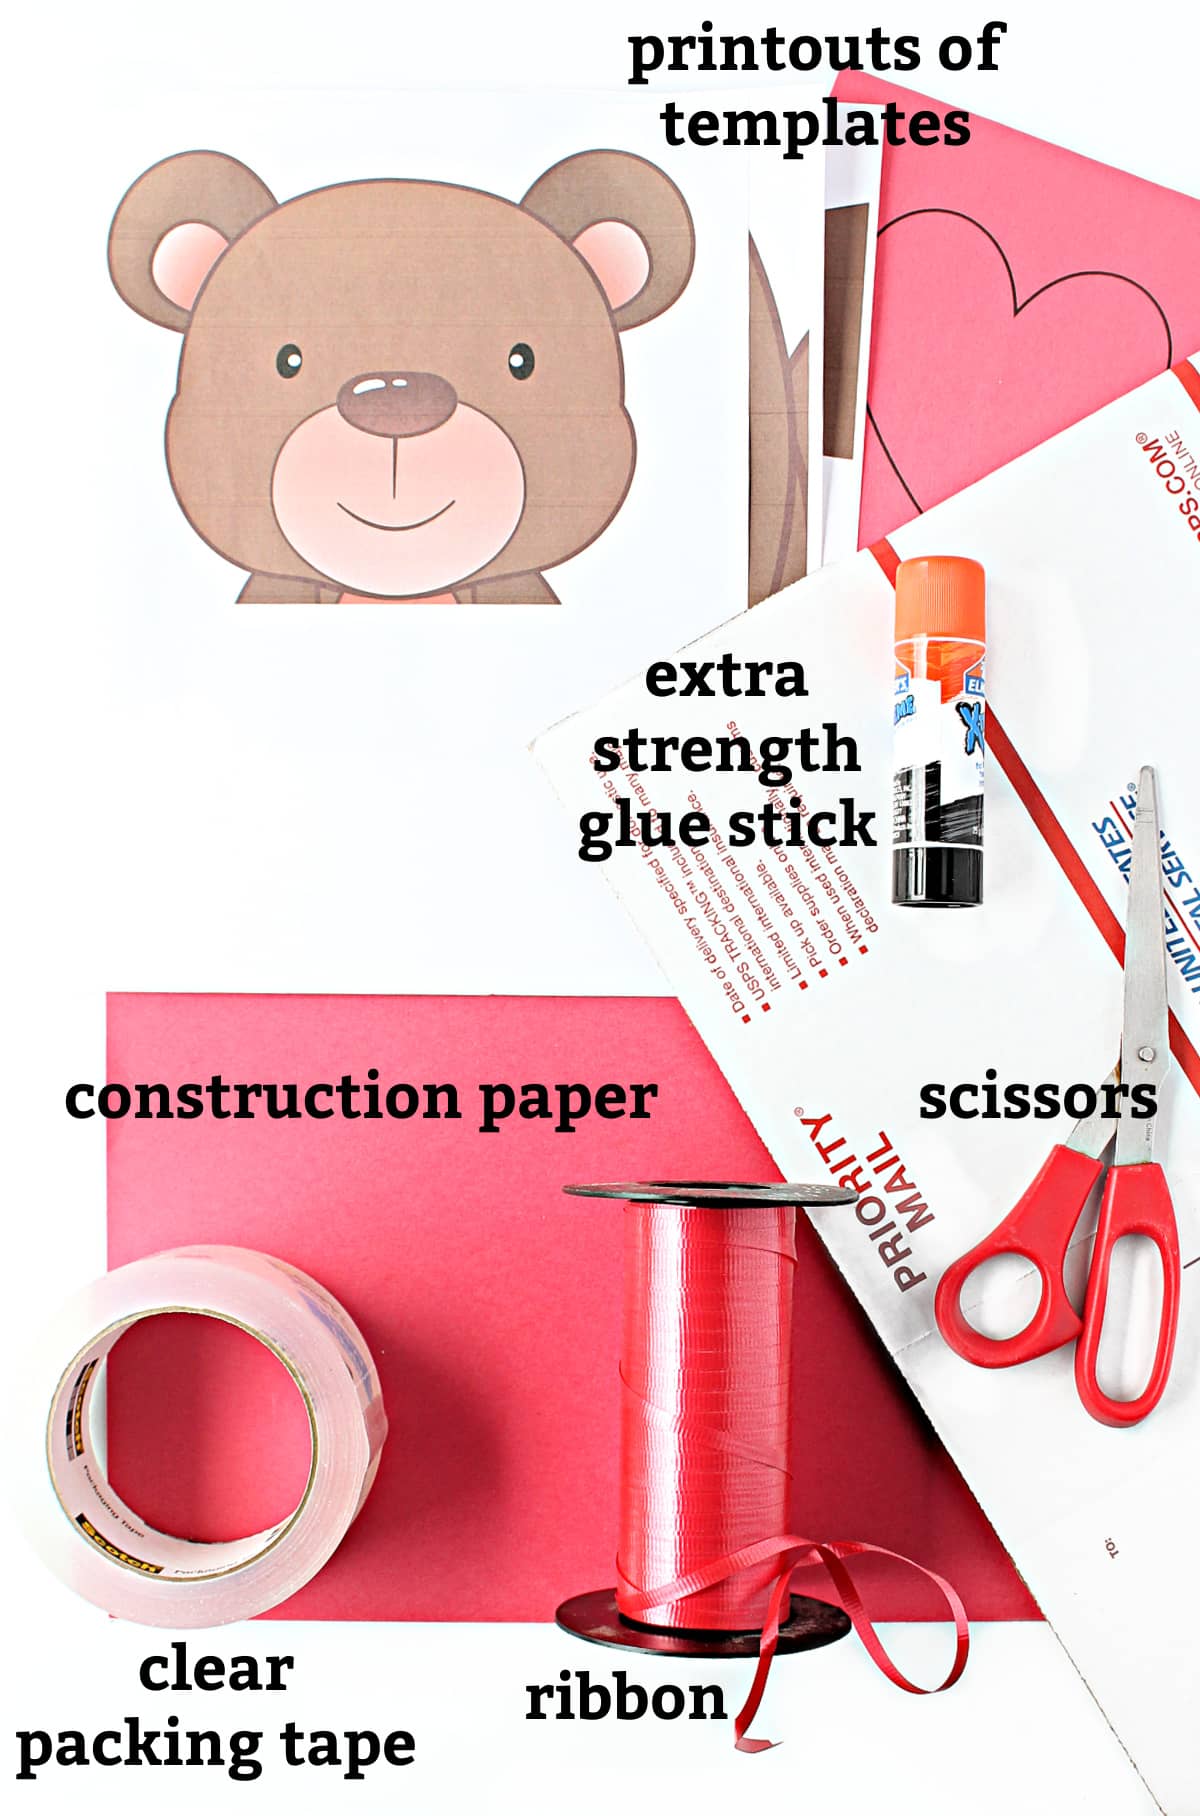 Materials: templates, glue stick, scissors,  construction paper, ribbon, clear packing tape.